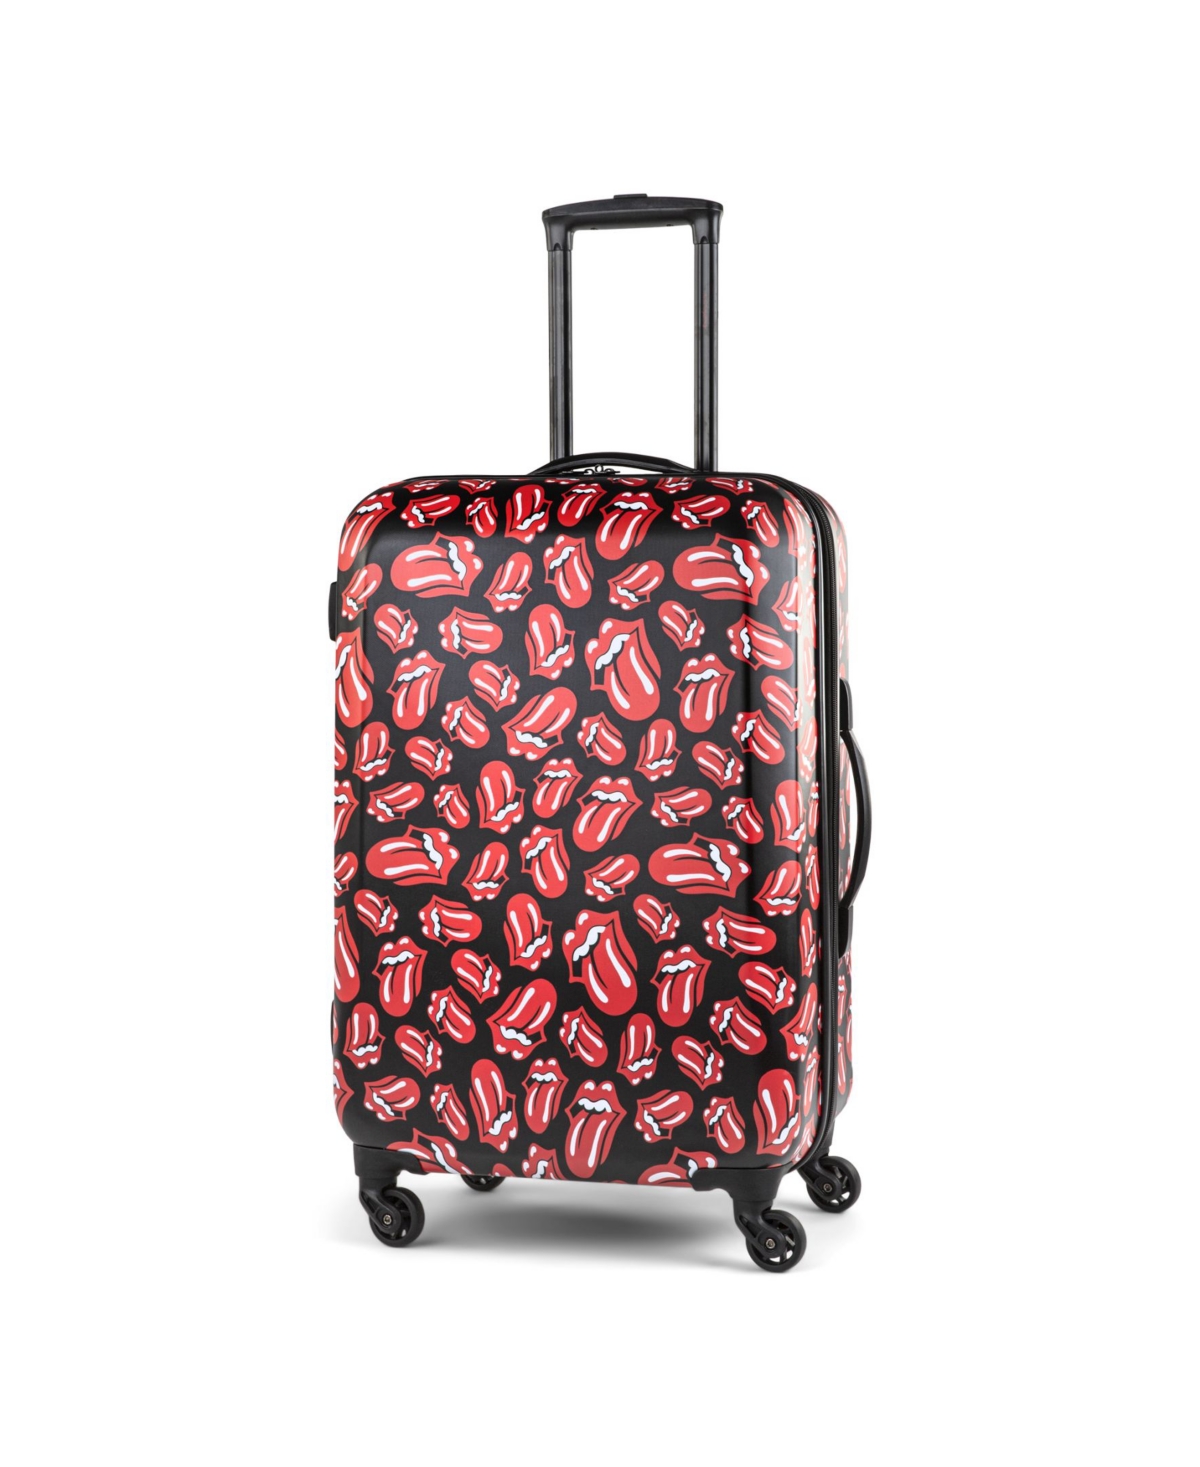 Ruby Tuesday 24" Spinner Luggage - Black and Red